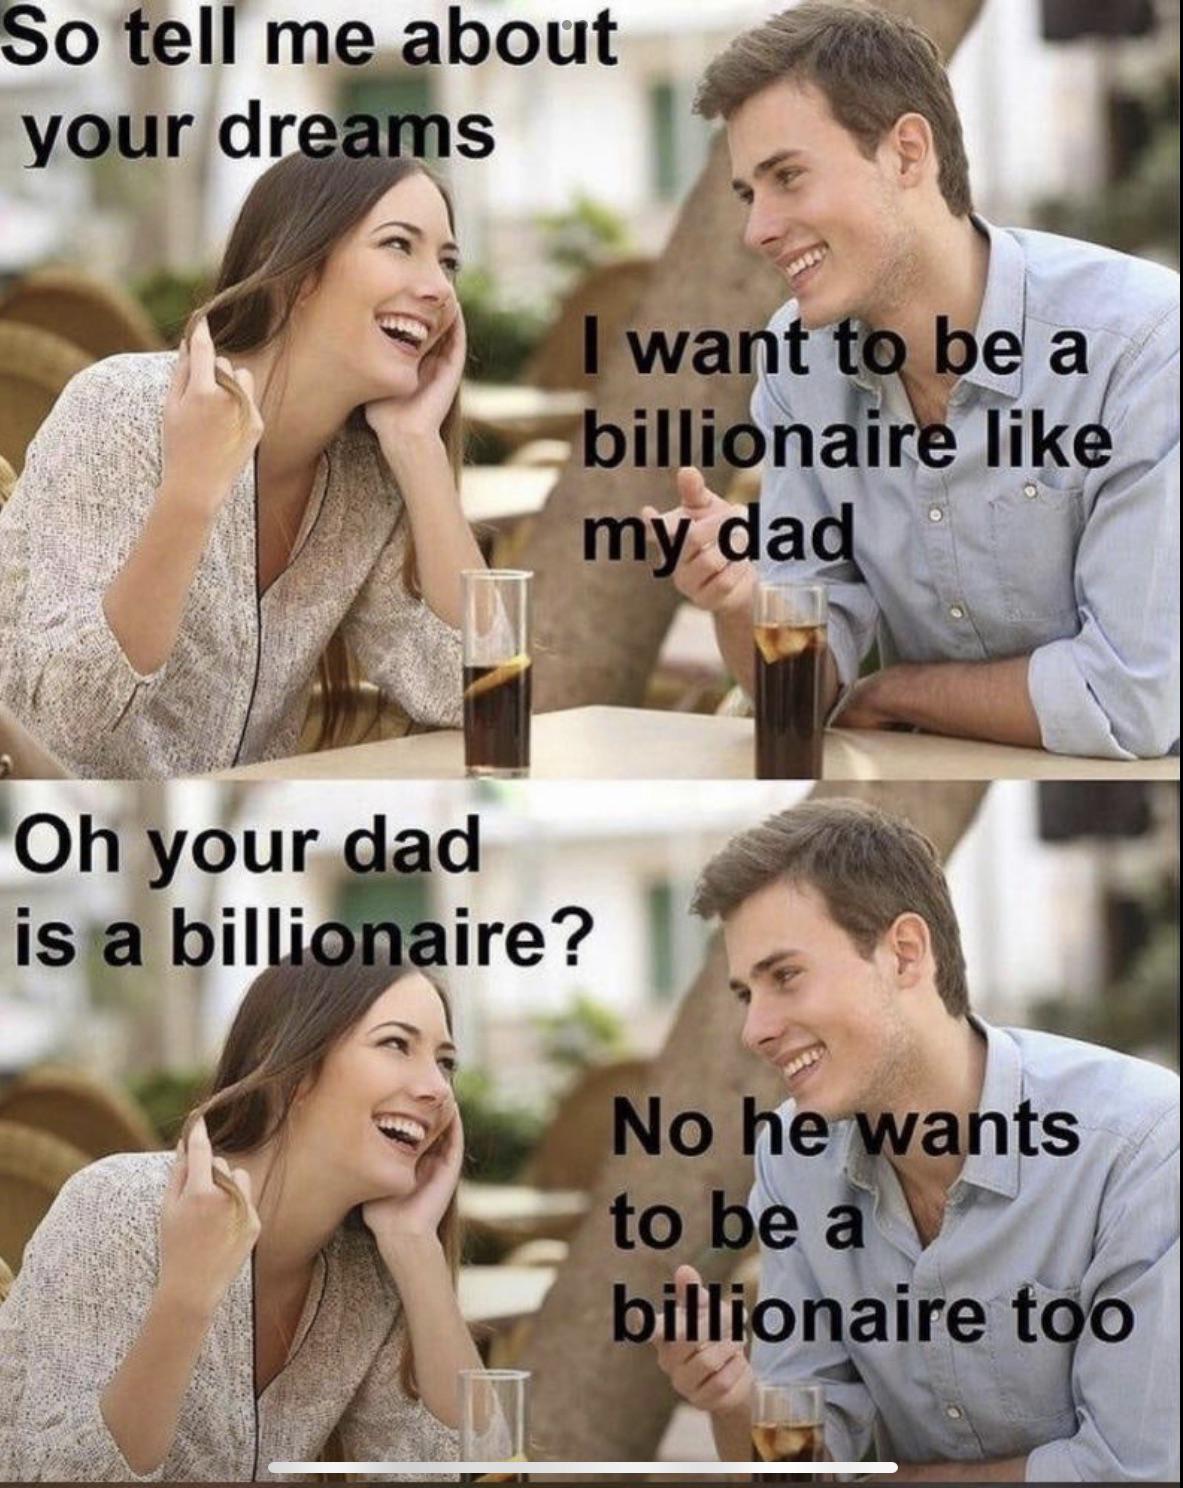 daily dose of randoms - want to be a billionaire like my ad - So tell me about your dreams I want to be a billionaire my dad Oh your dad is a billionaire? No he wants to be a billionaire too